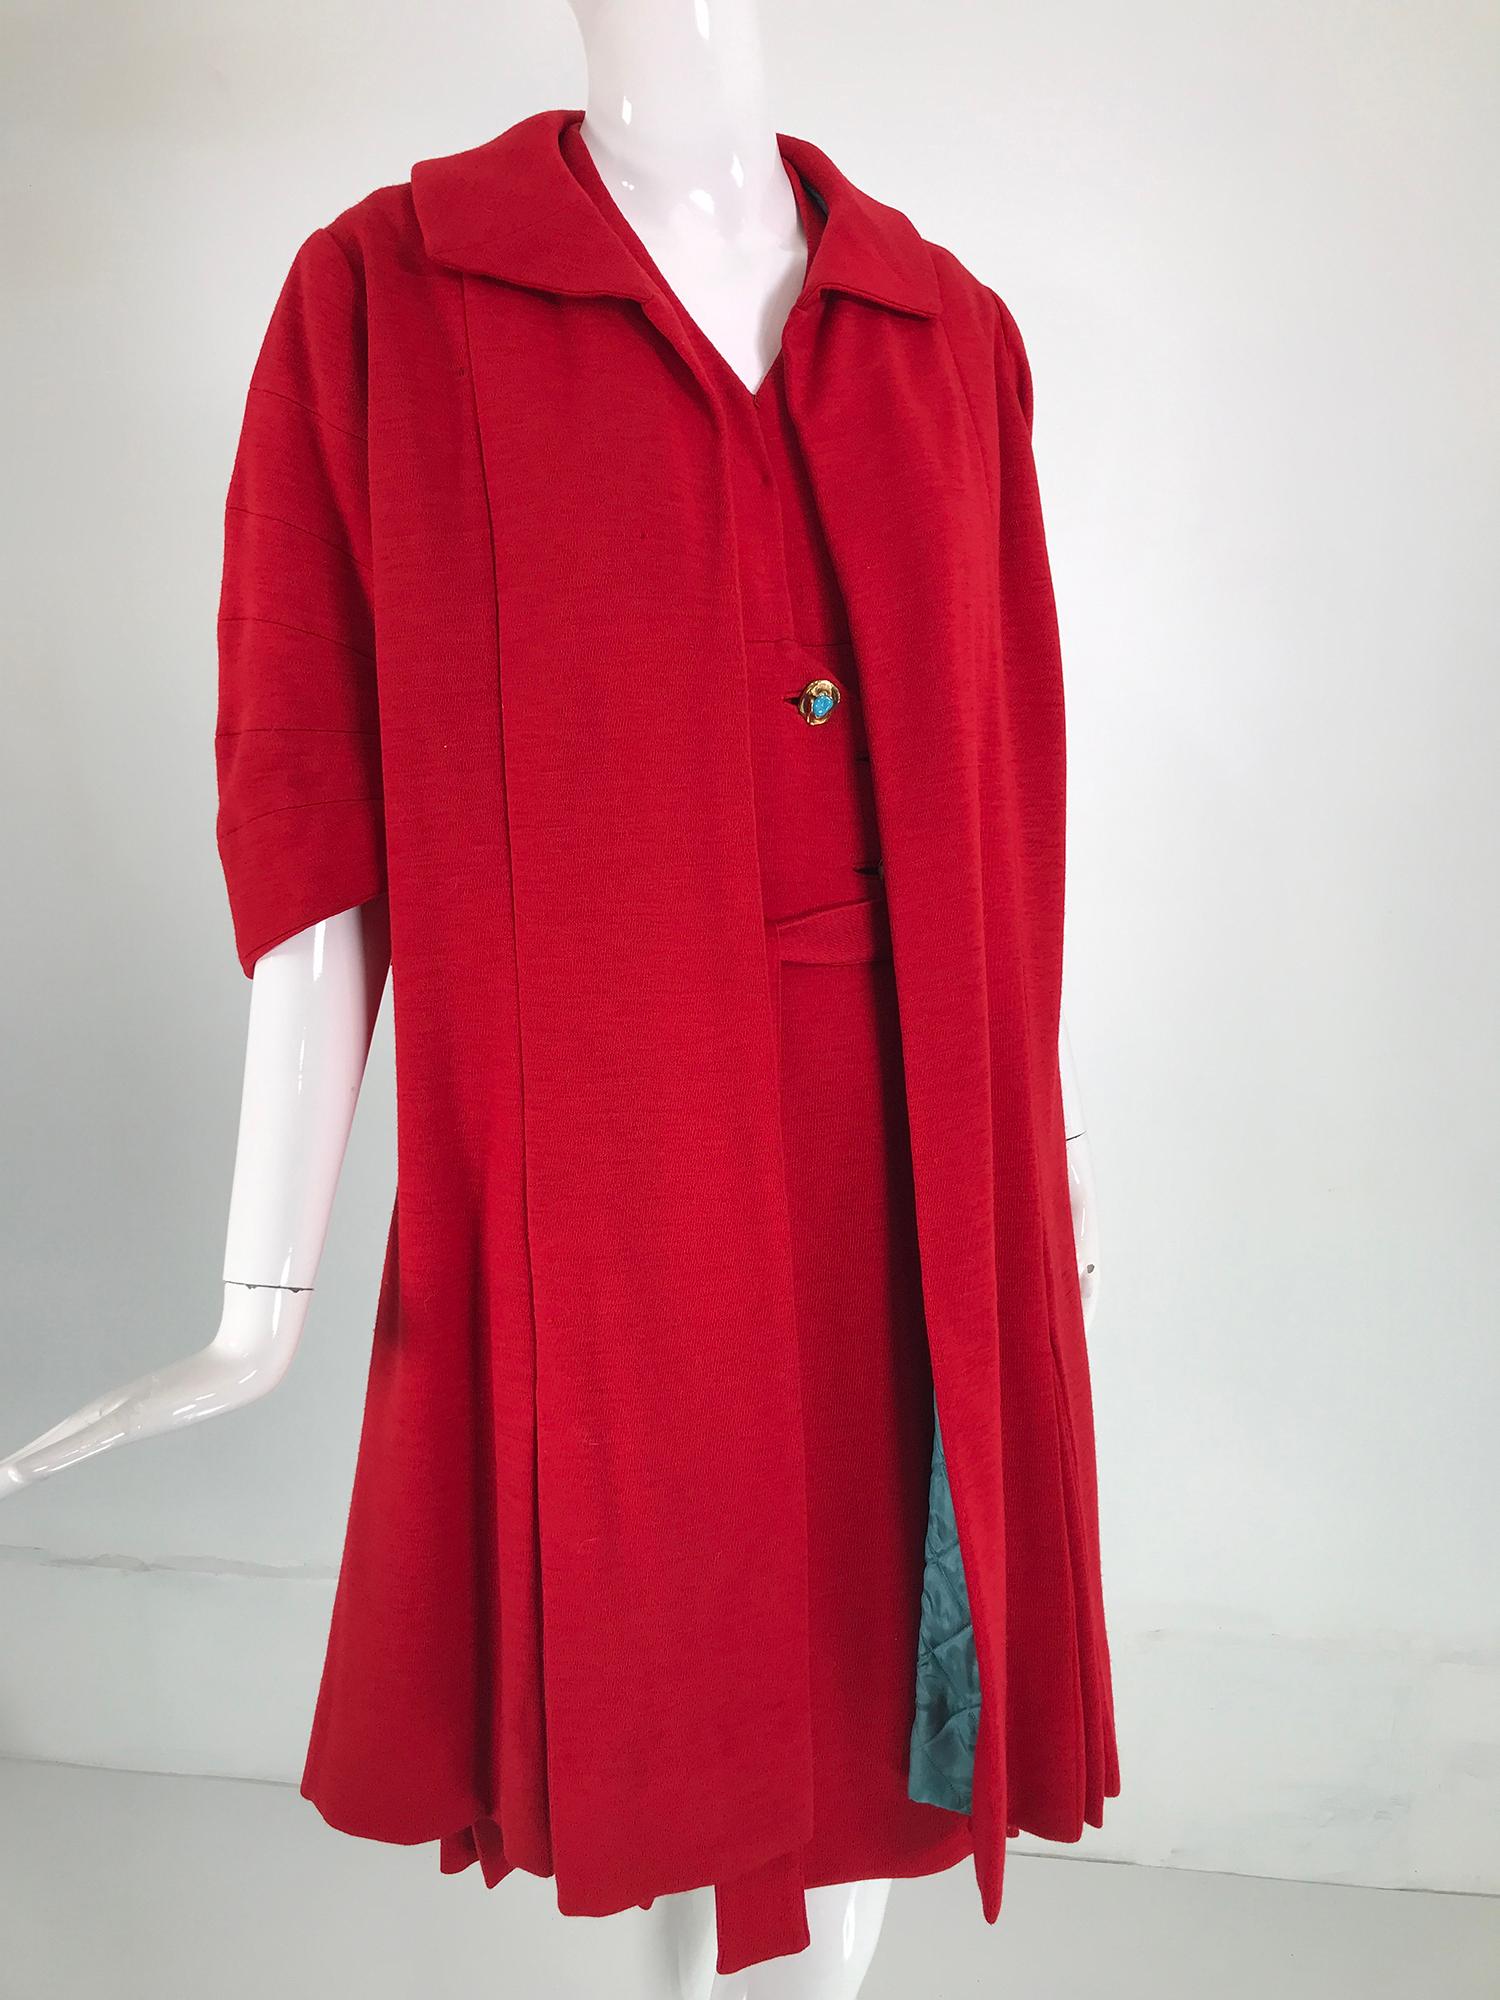 Coco Chanel Red Haute Couture 1950s 2 pc Wool Jersey Jewel Button Dress & Coat  For Sale 1